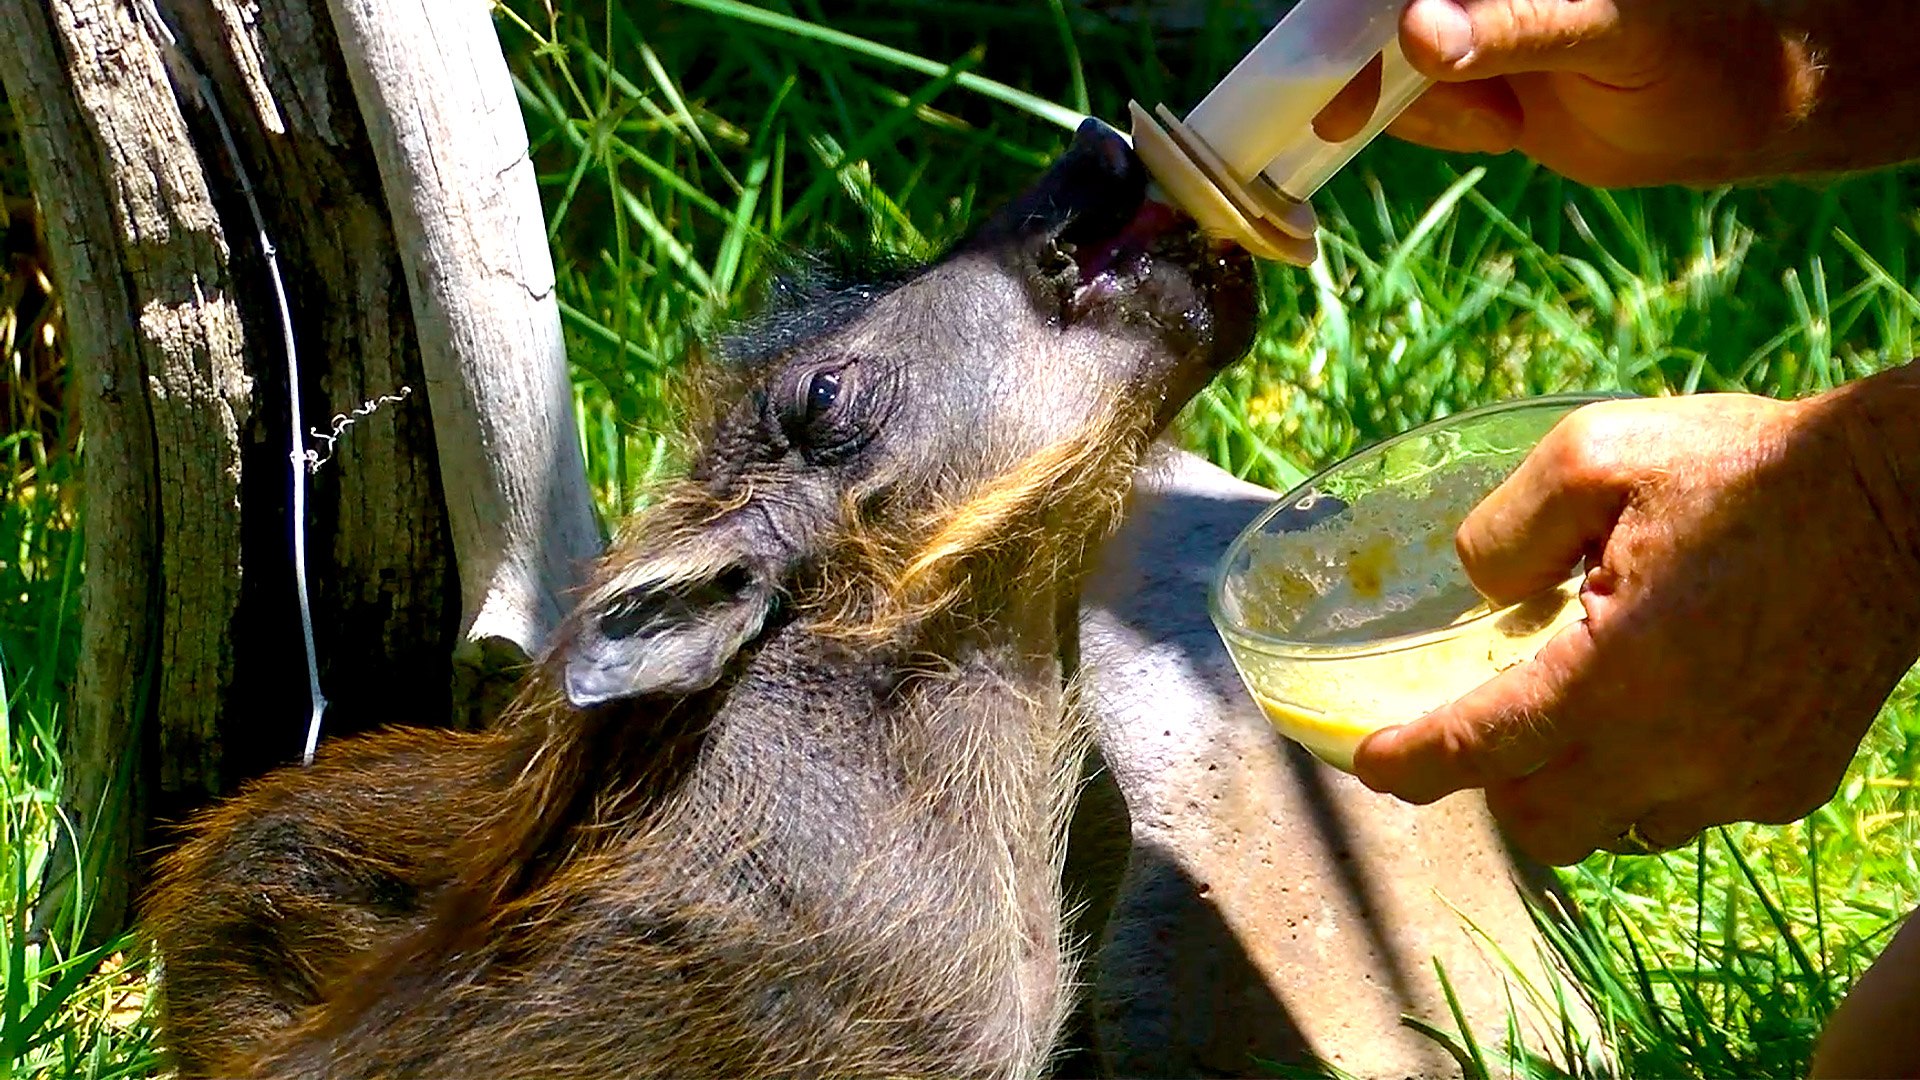 Meet the Cute Baby Warthogs from Out of Africa Wildlife Park